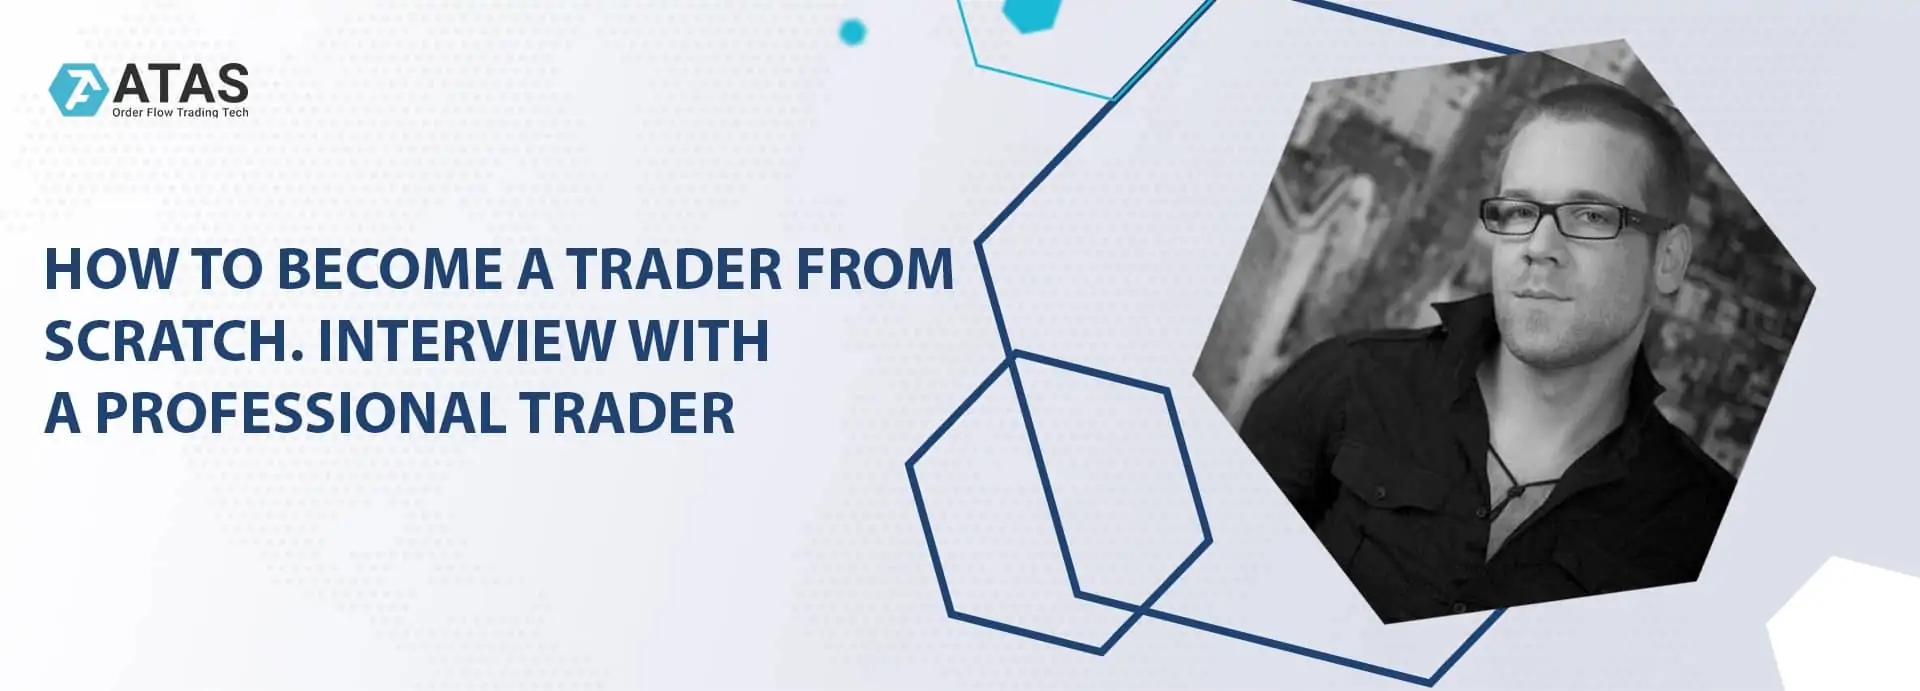 HOW TO BECOME A TRADER FROM SCRATCH. INTERVIEW WITH A PROFESSIONAL TRADER